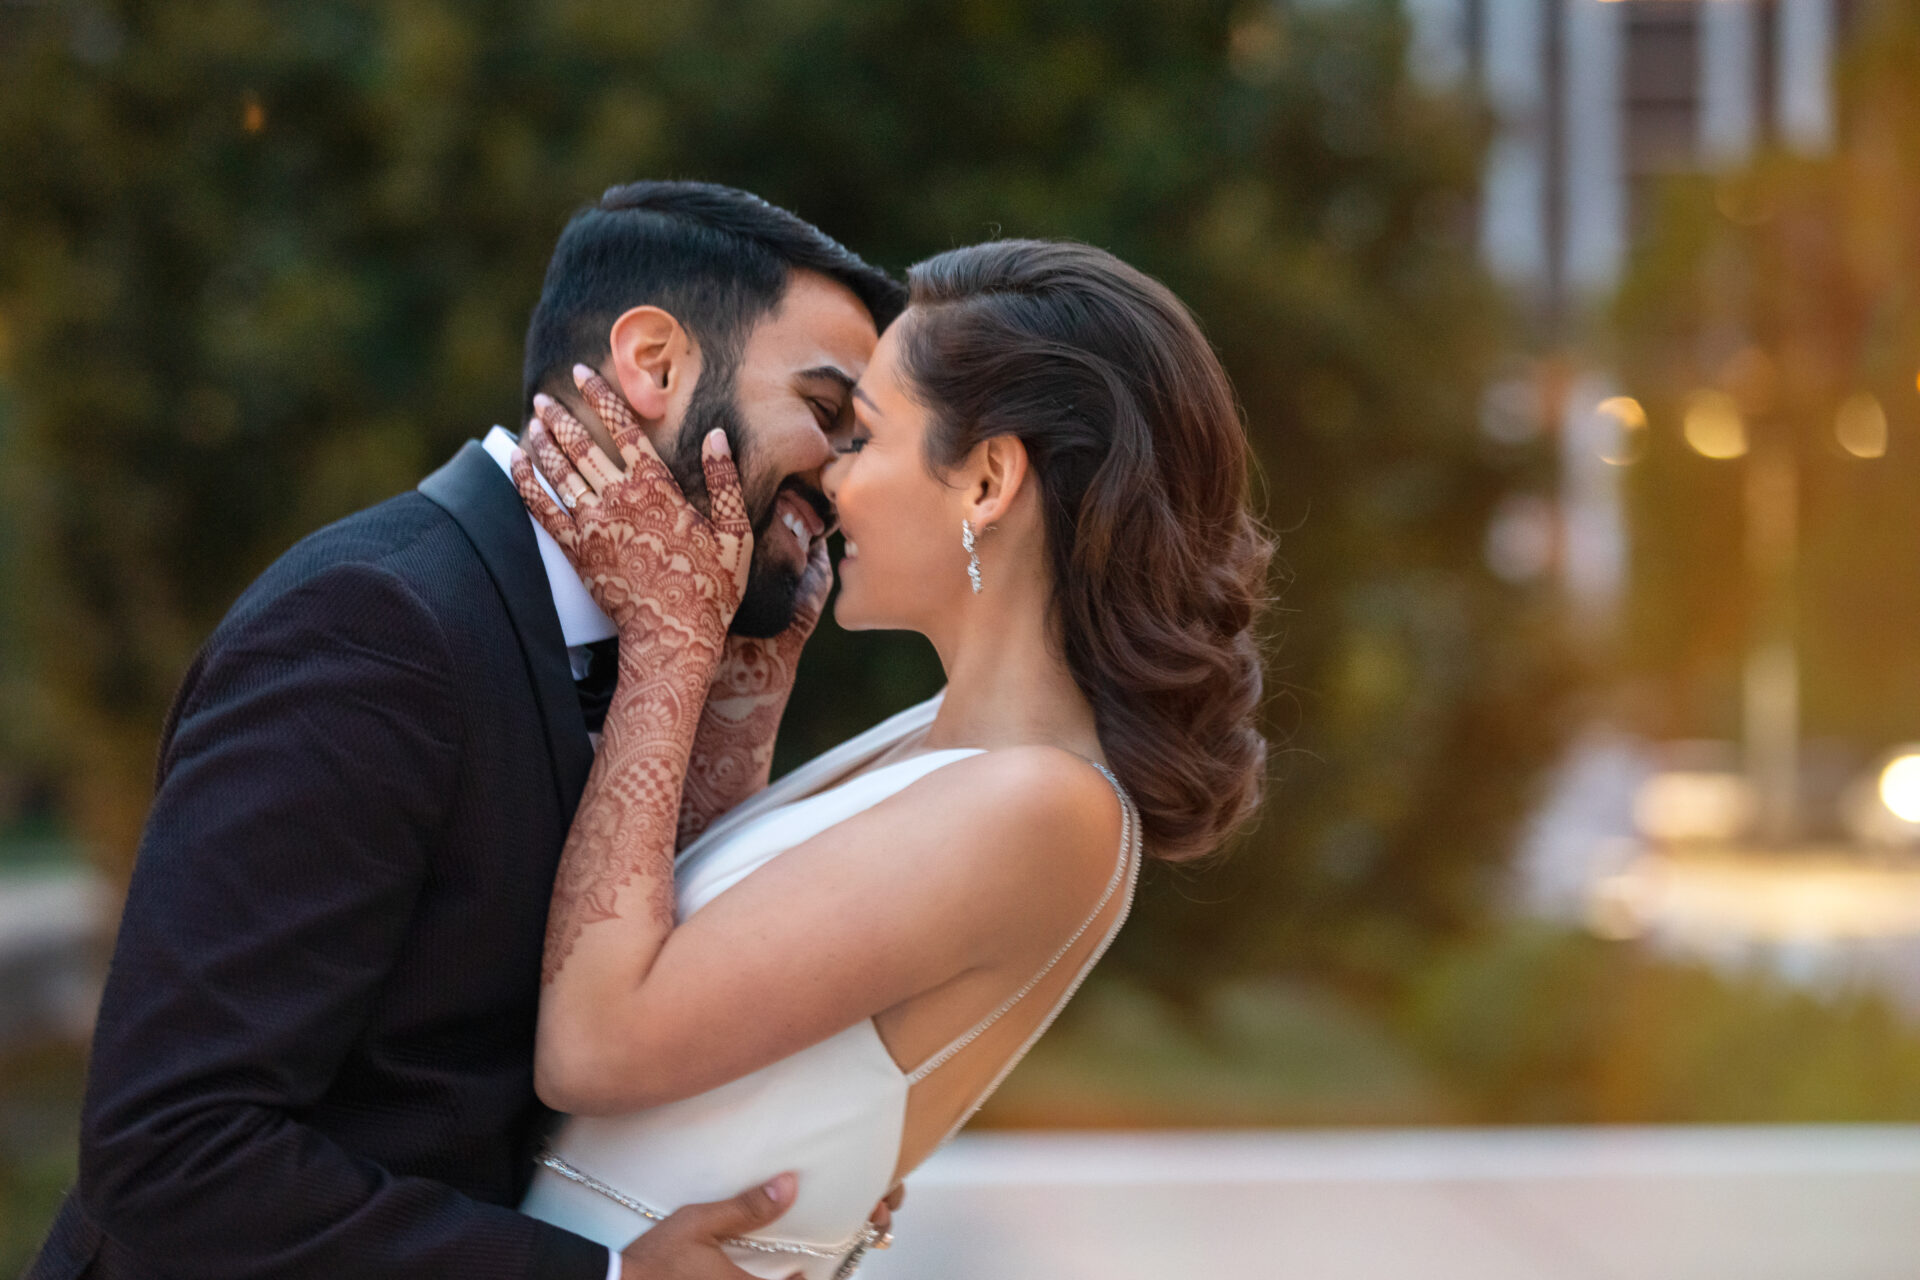 South Asian Wedding photo of a happy couple by Astrapia Photography